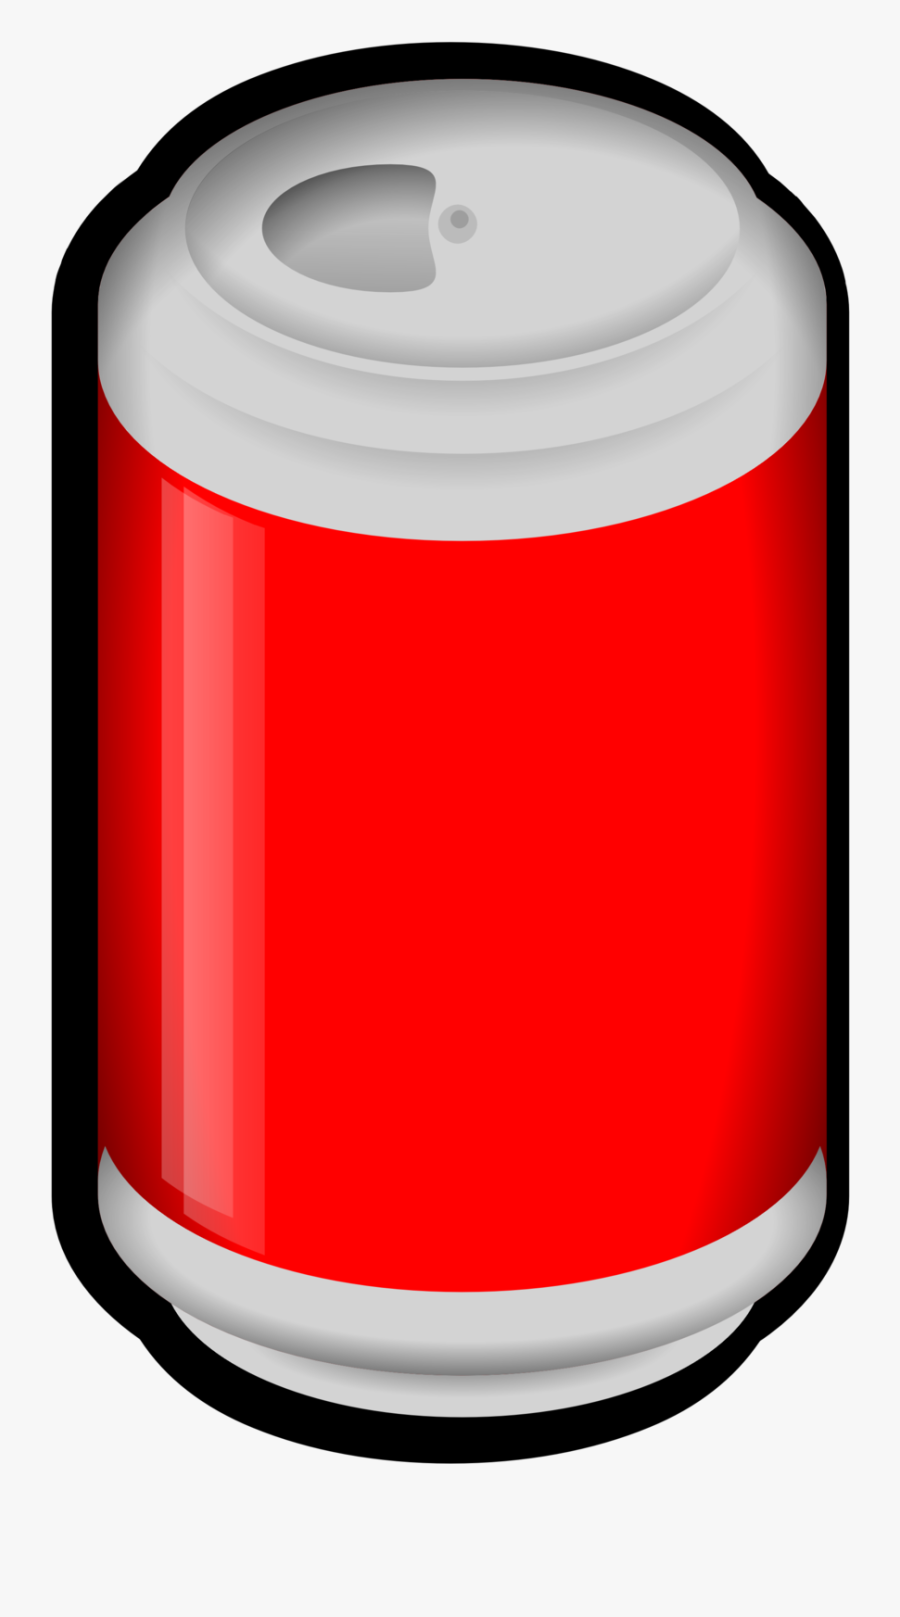 Red,fizzy Drinks,beer - Can Clipart Transparent Background, Transparent Clipart